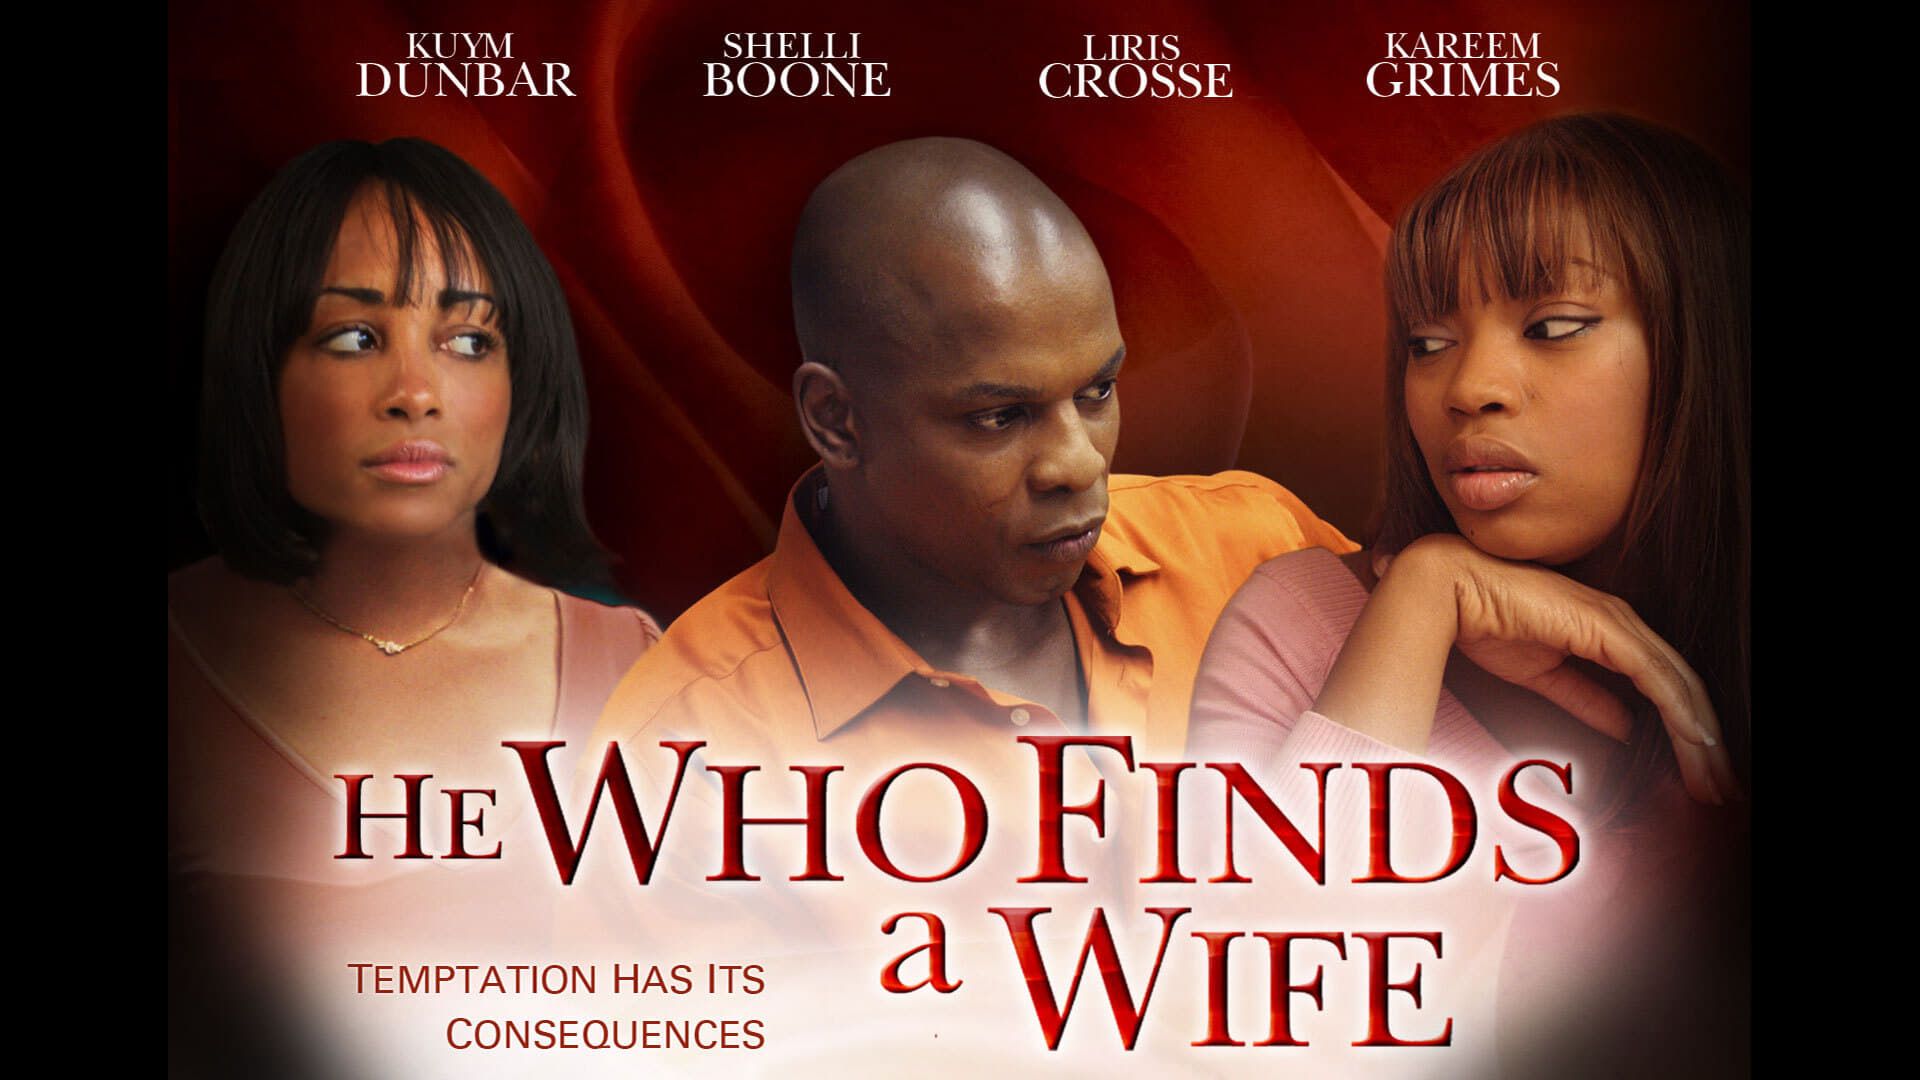 He Who Finds a Wife background